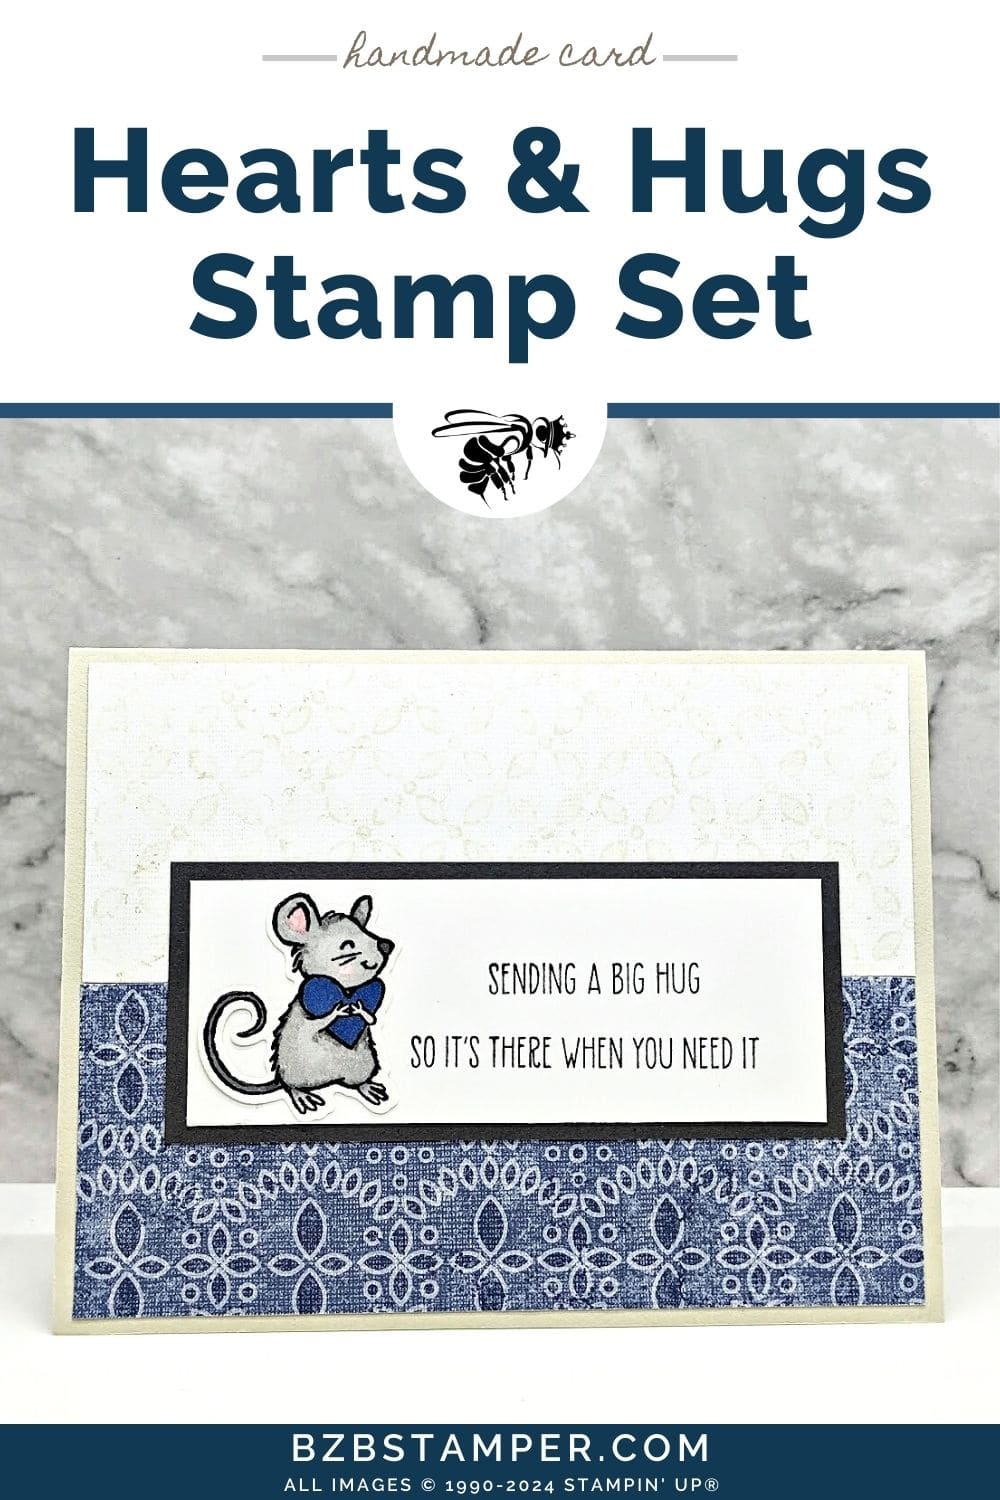 Hearts and Hugs Bundle by Stampin' Up! in ivory, navy and gray.  Features a cute mouse image and a "sending a big hug so it's there when you need it" sentiment.